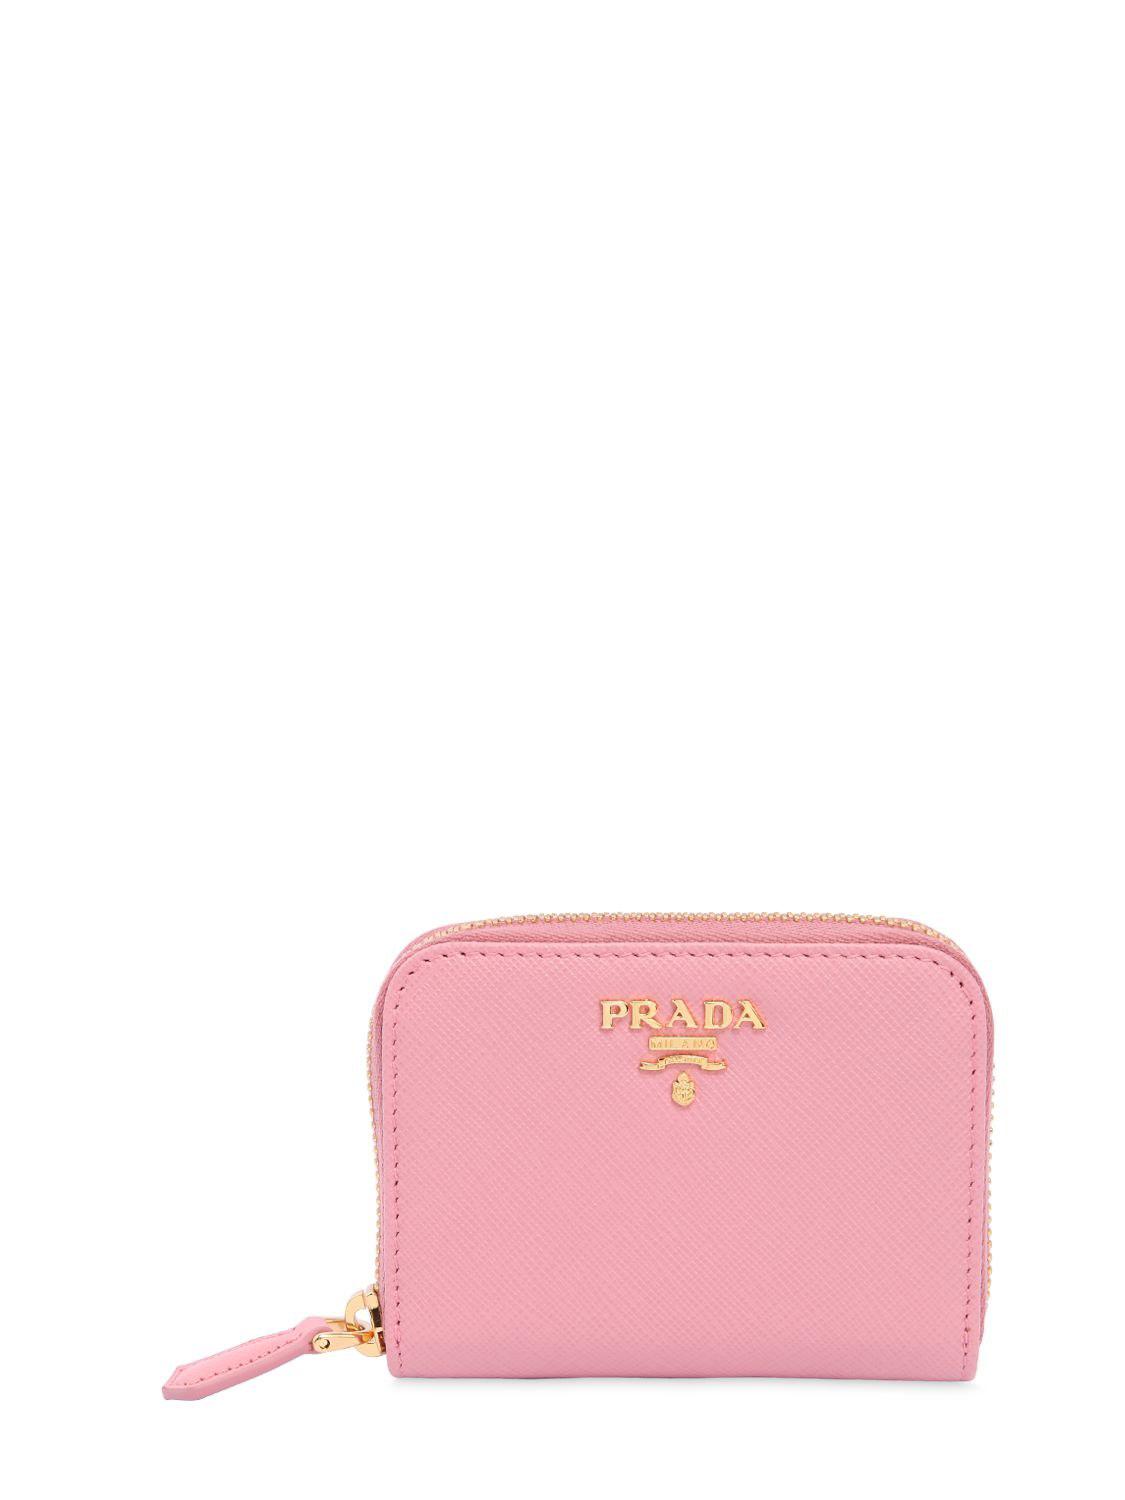 Prada Small Saffiano Leather Zip Coin Purse in Pink | Lyst